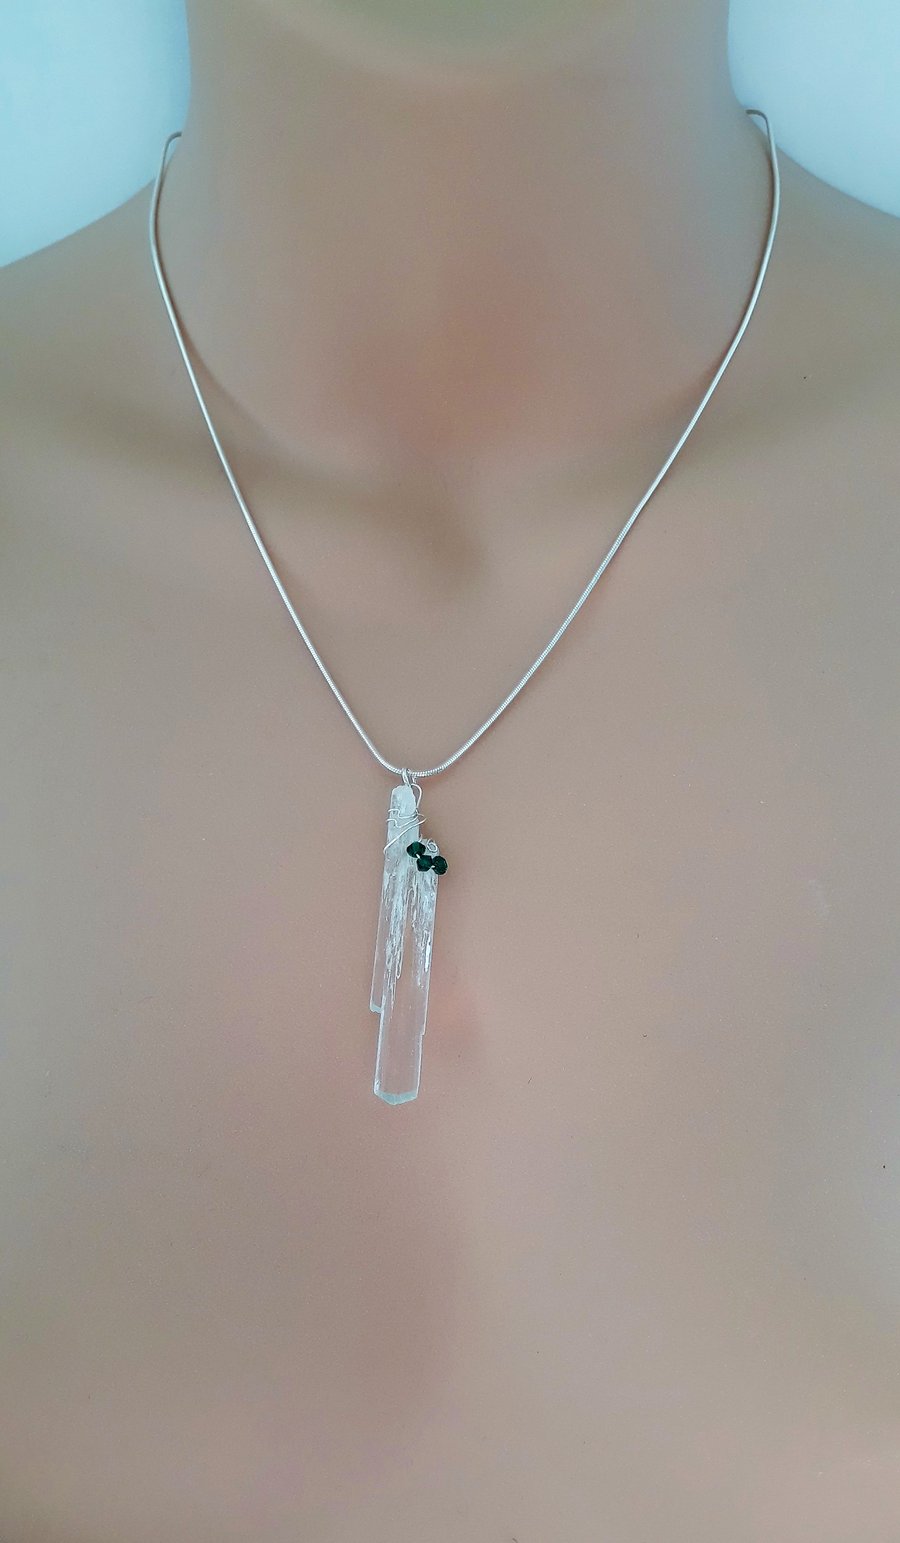 Green Kunzite Pendant Wire Wrapped in Sterling Silver with Swarovski Crystals